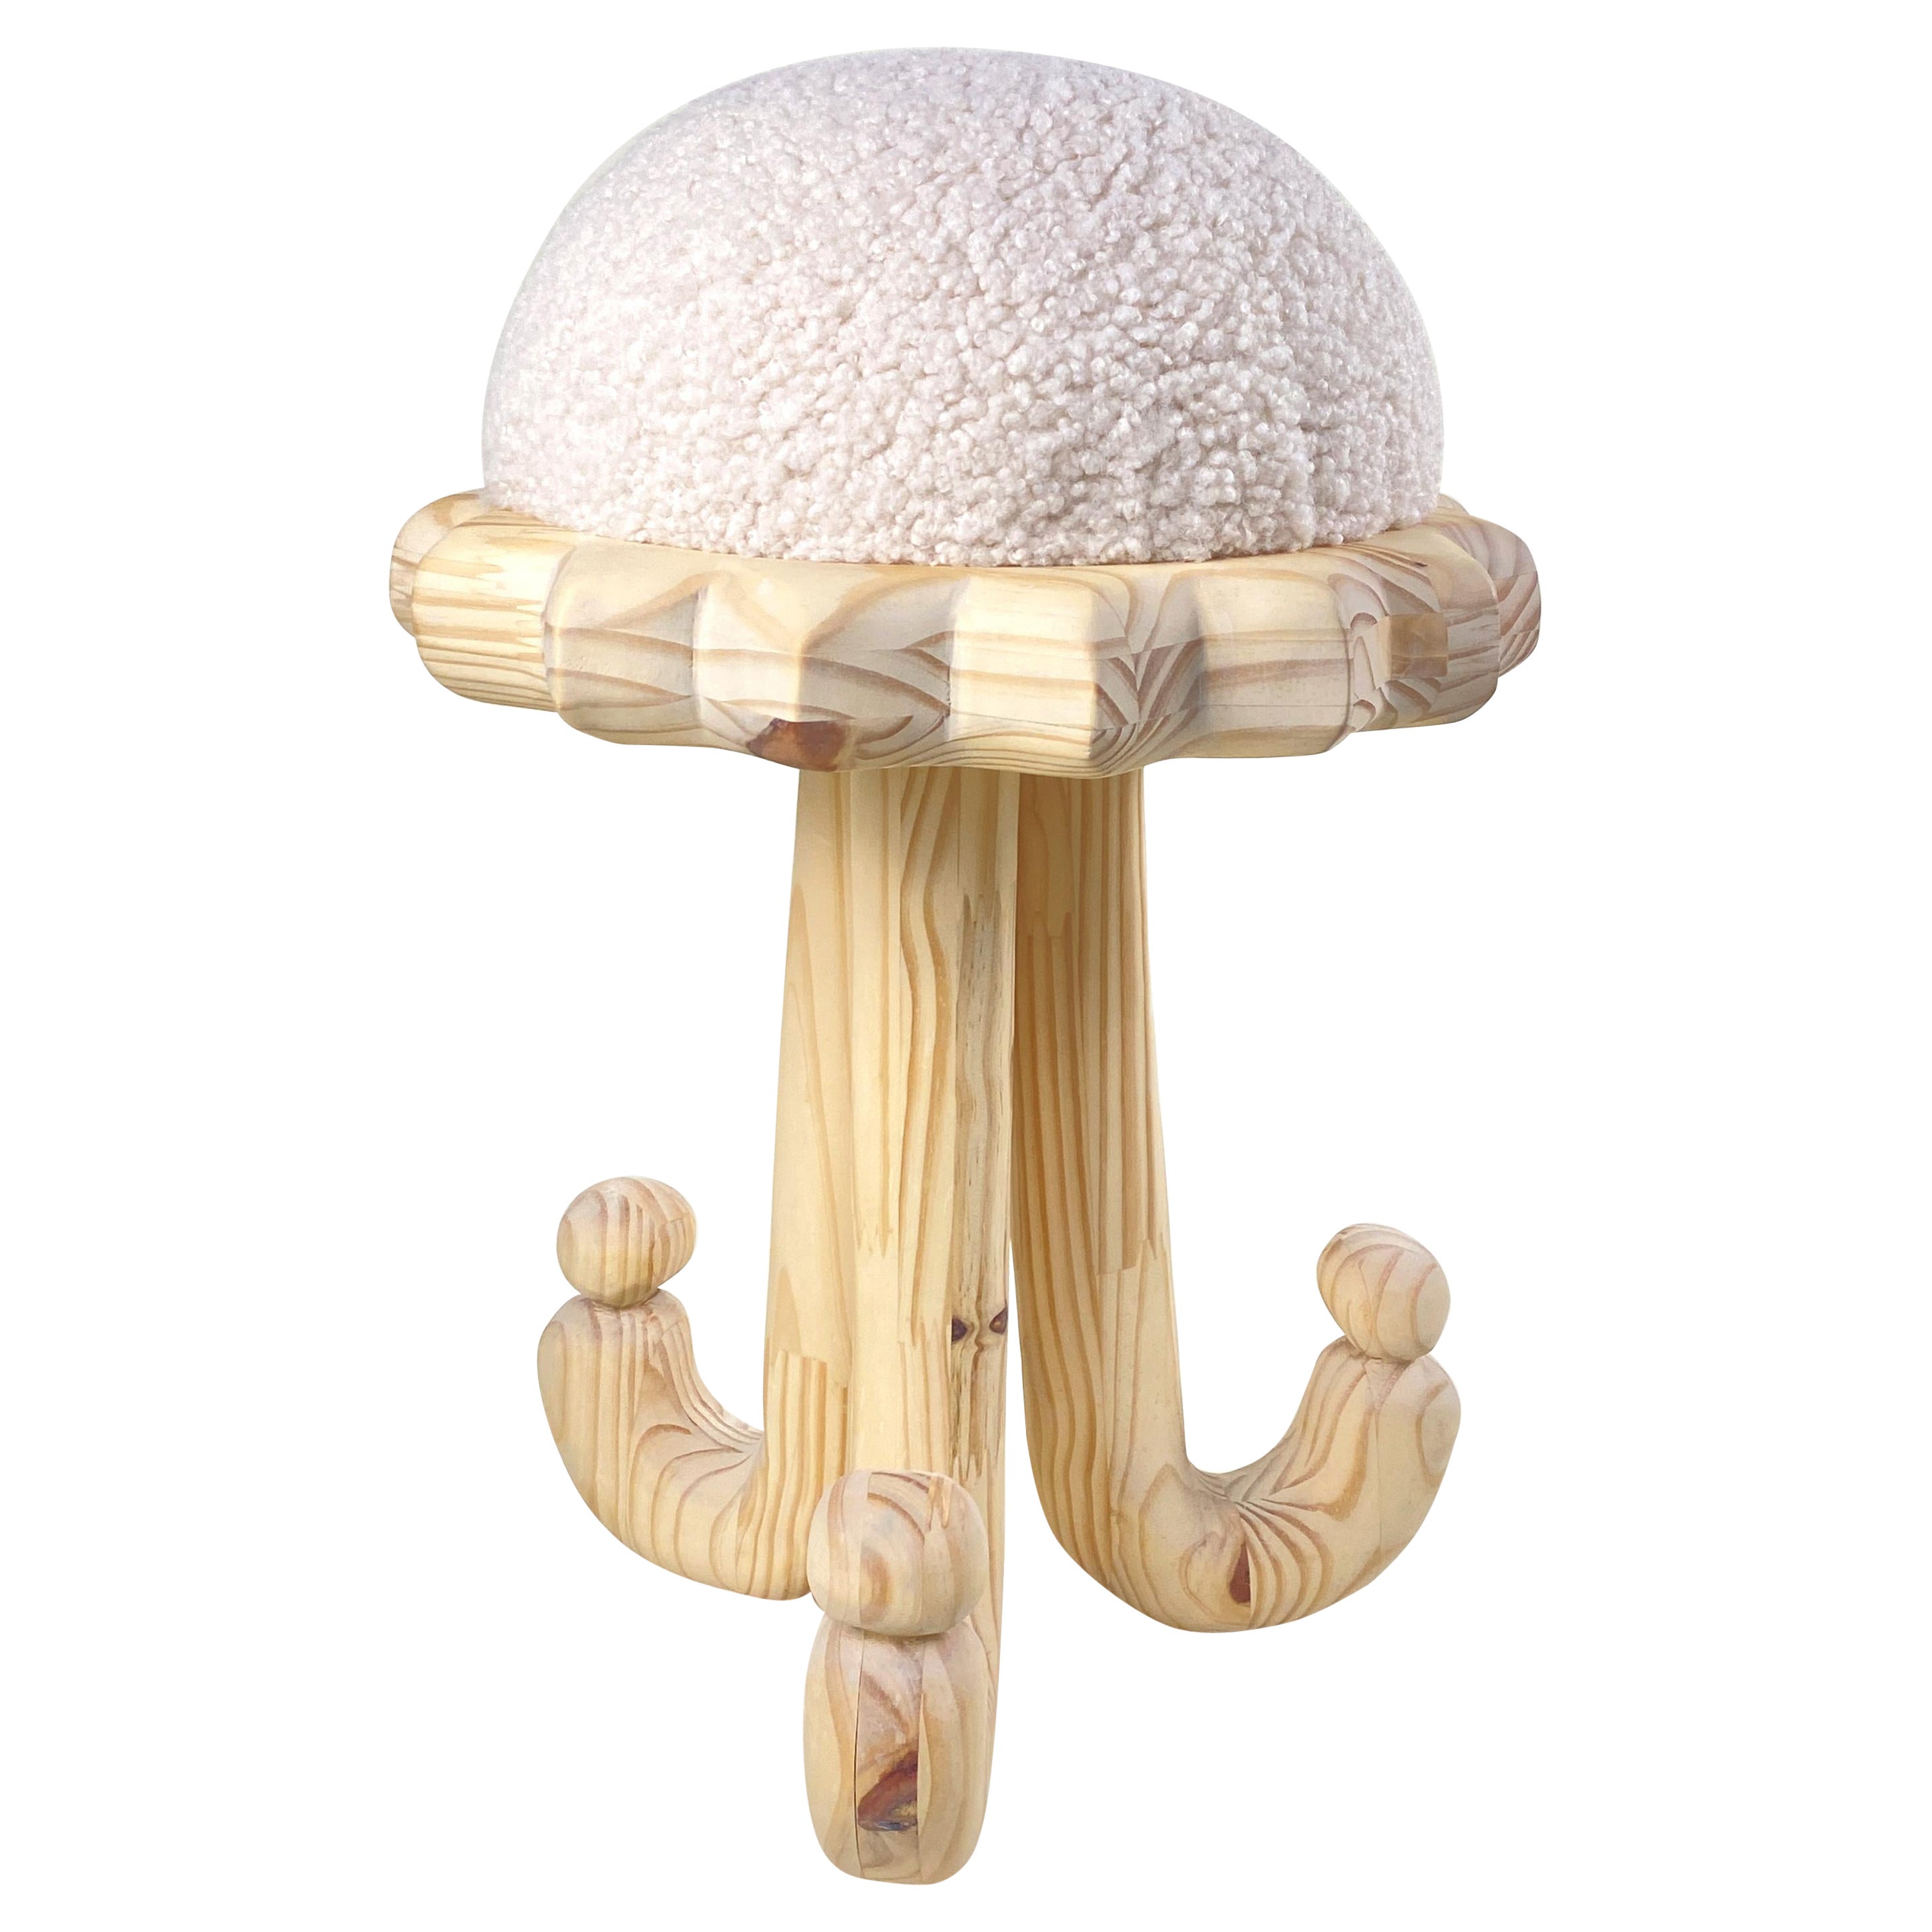 JoJoJo hand carved by hand wood stool, edition by artist Alix Coco For Sale